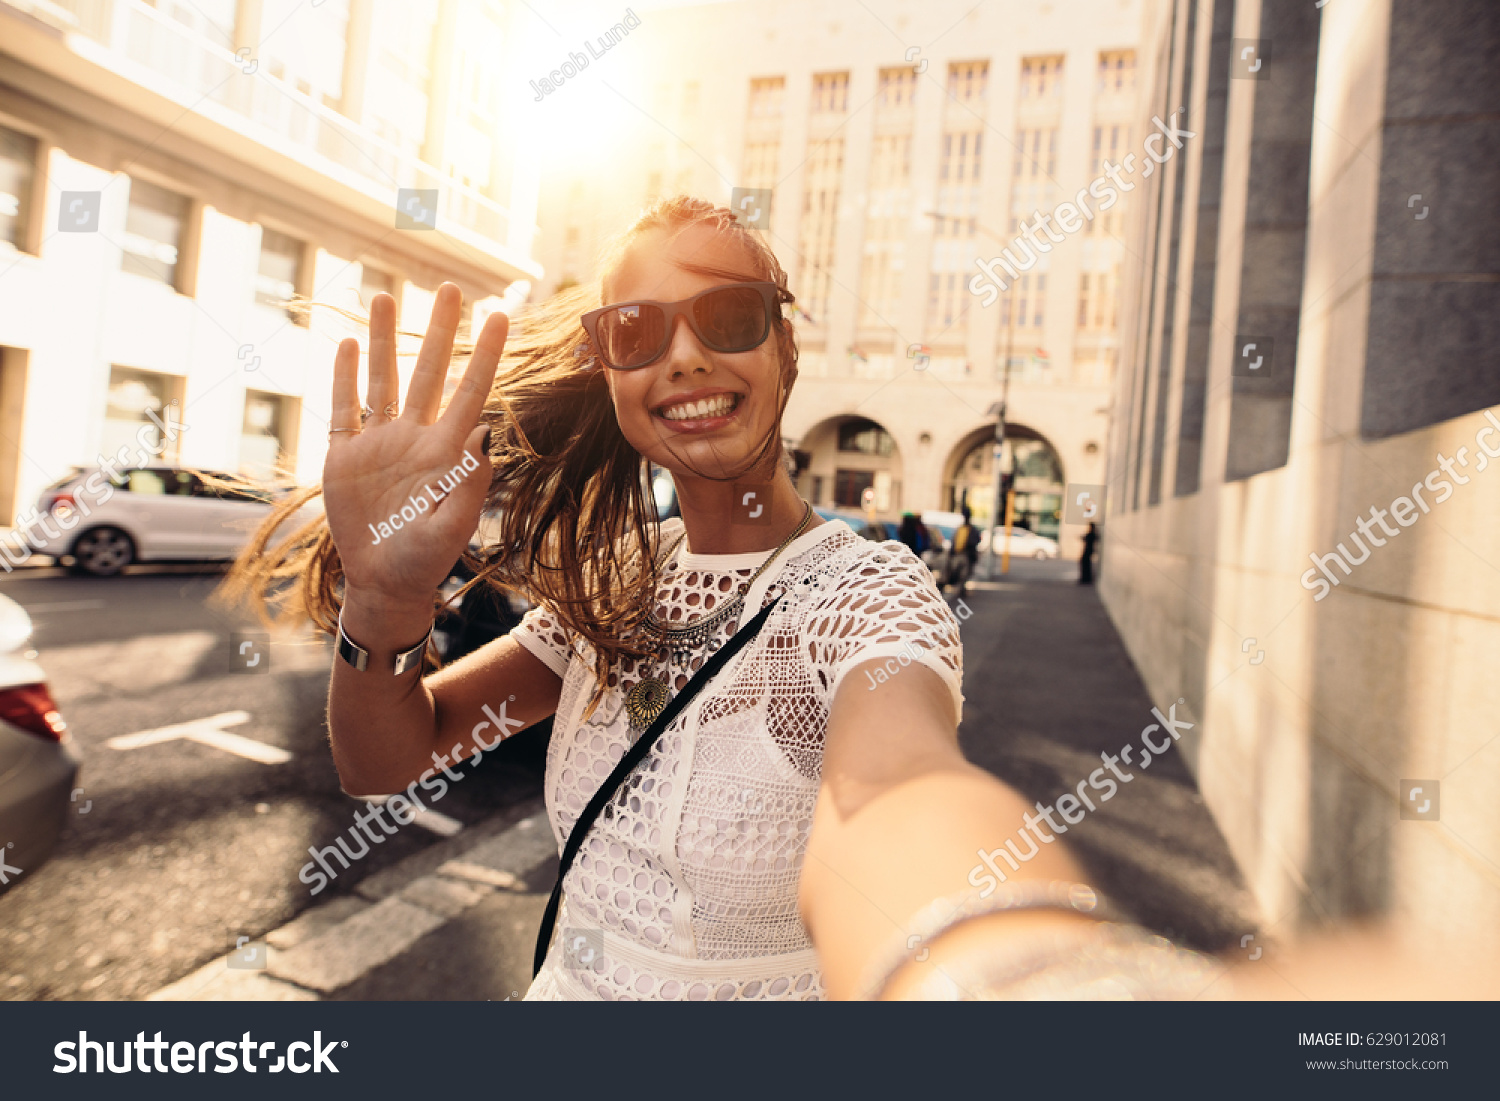 Tourist posing for a selfie in a street. Vlogger recording content for her travel vlog. #629012081